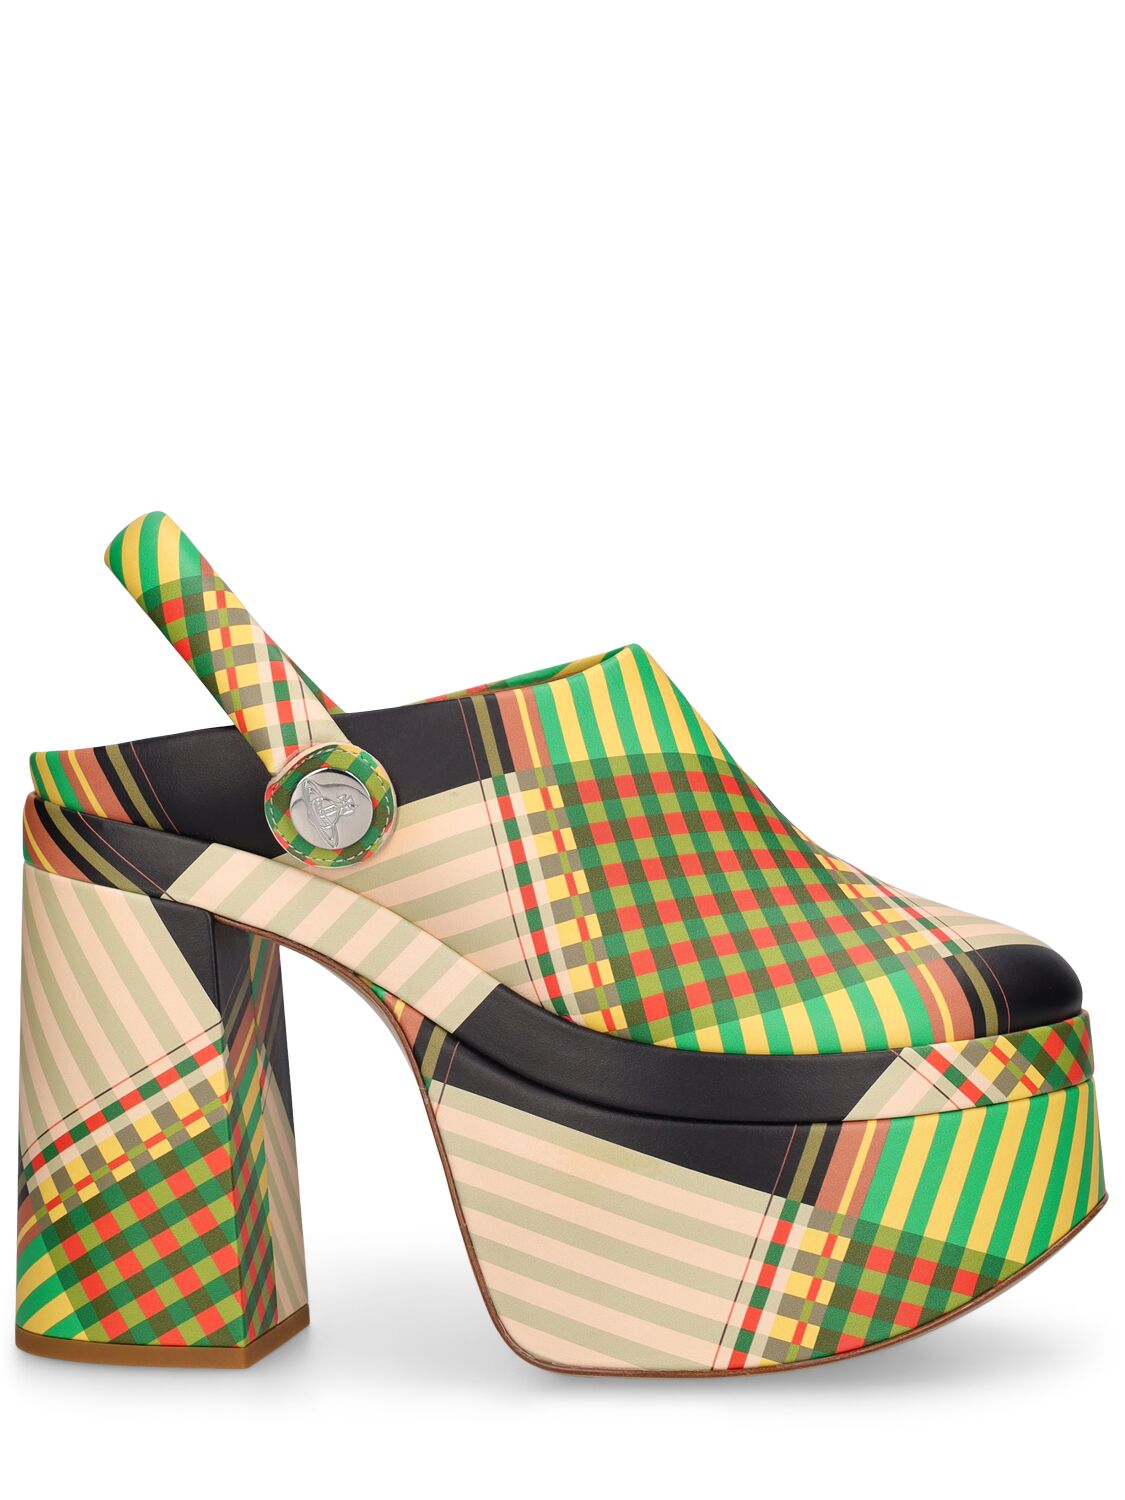 Vivienne Westwood 115mm Swamp Leather Clogs In Green,multi